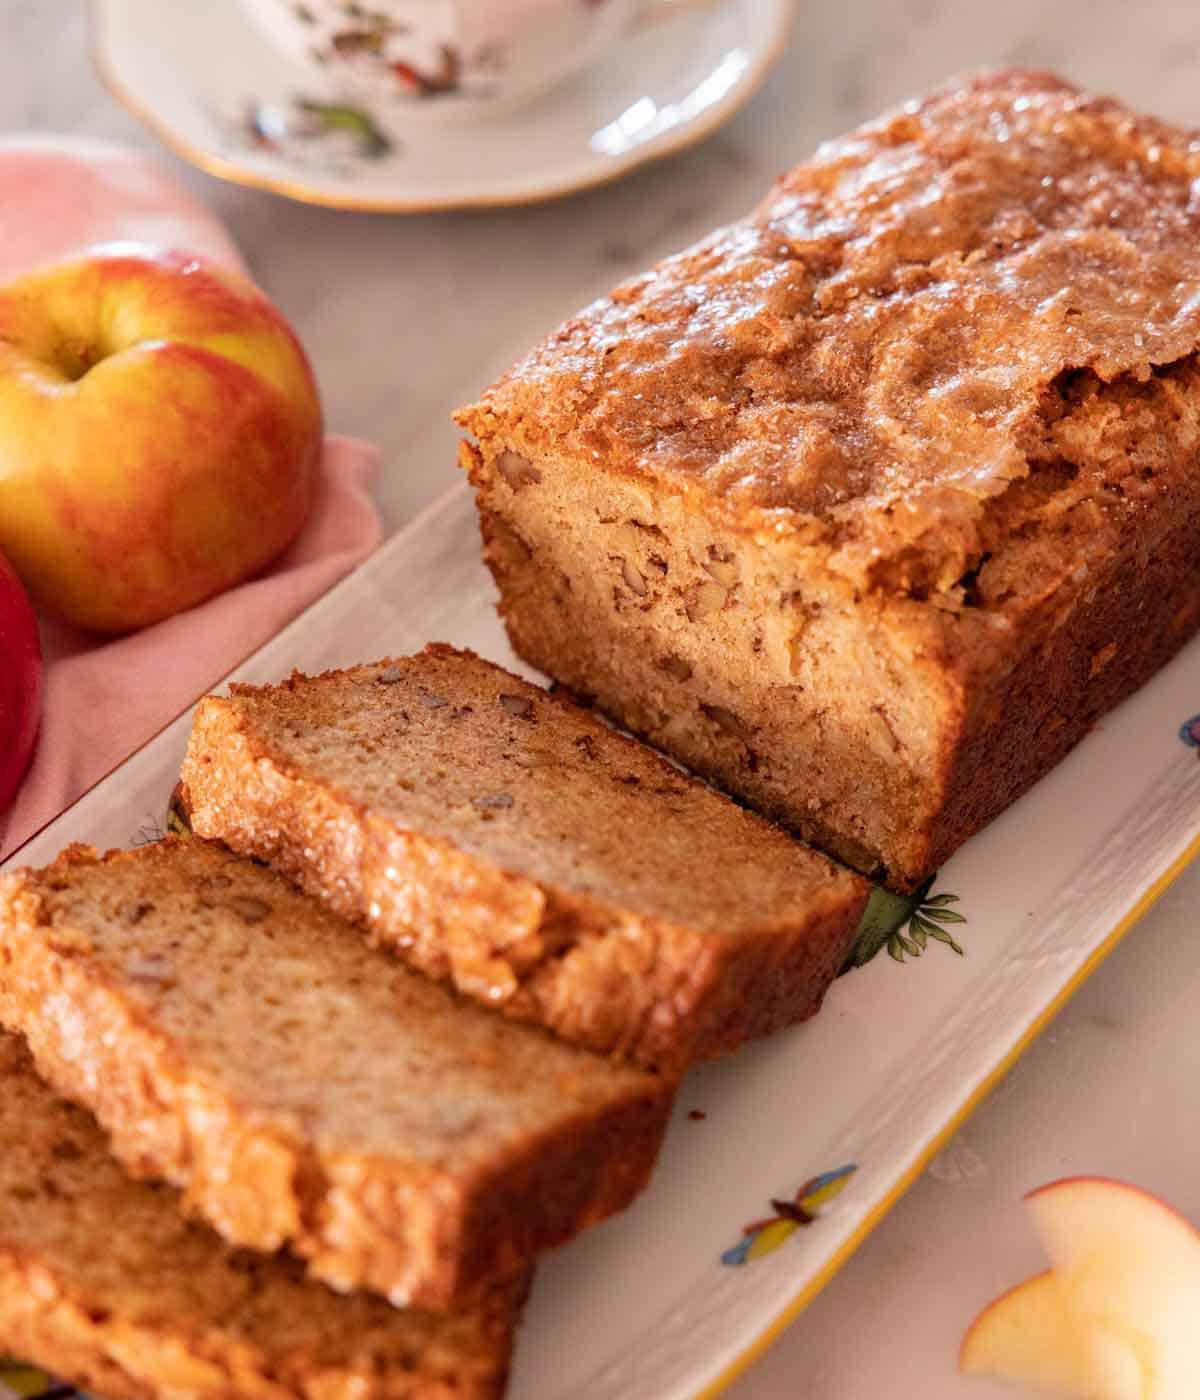 A platter with a loaf of apple bread with three slices cut in front. Apples in the background.